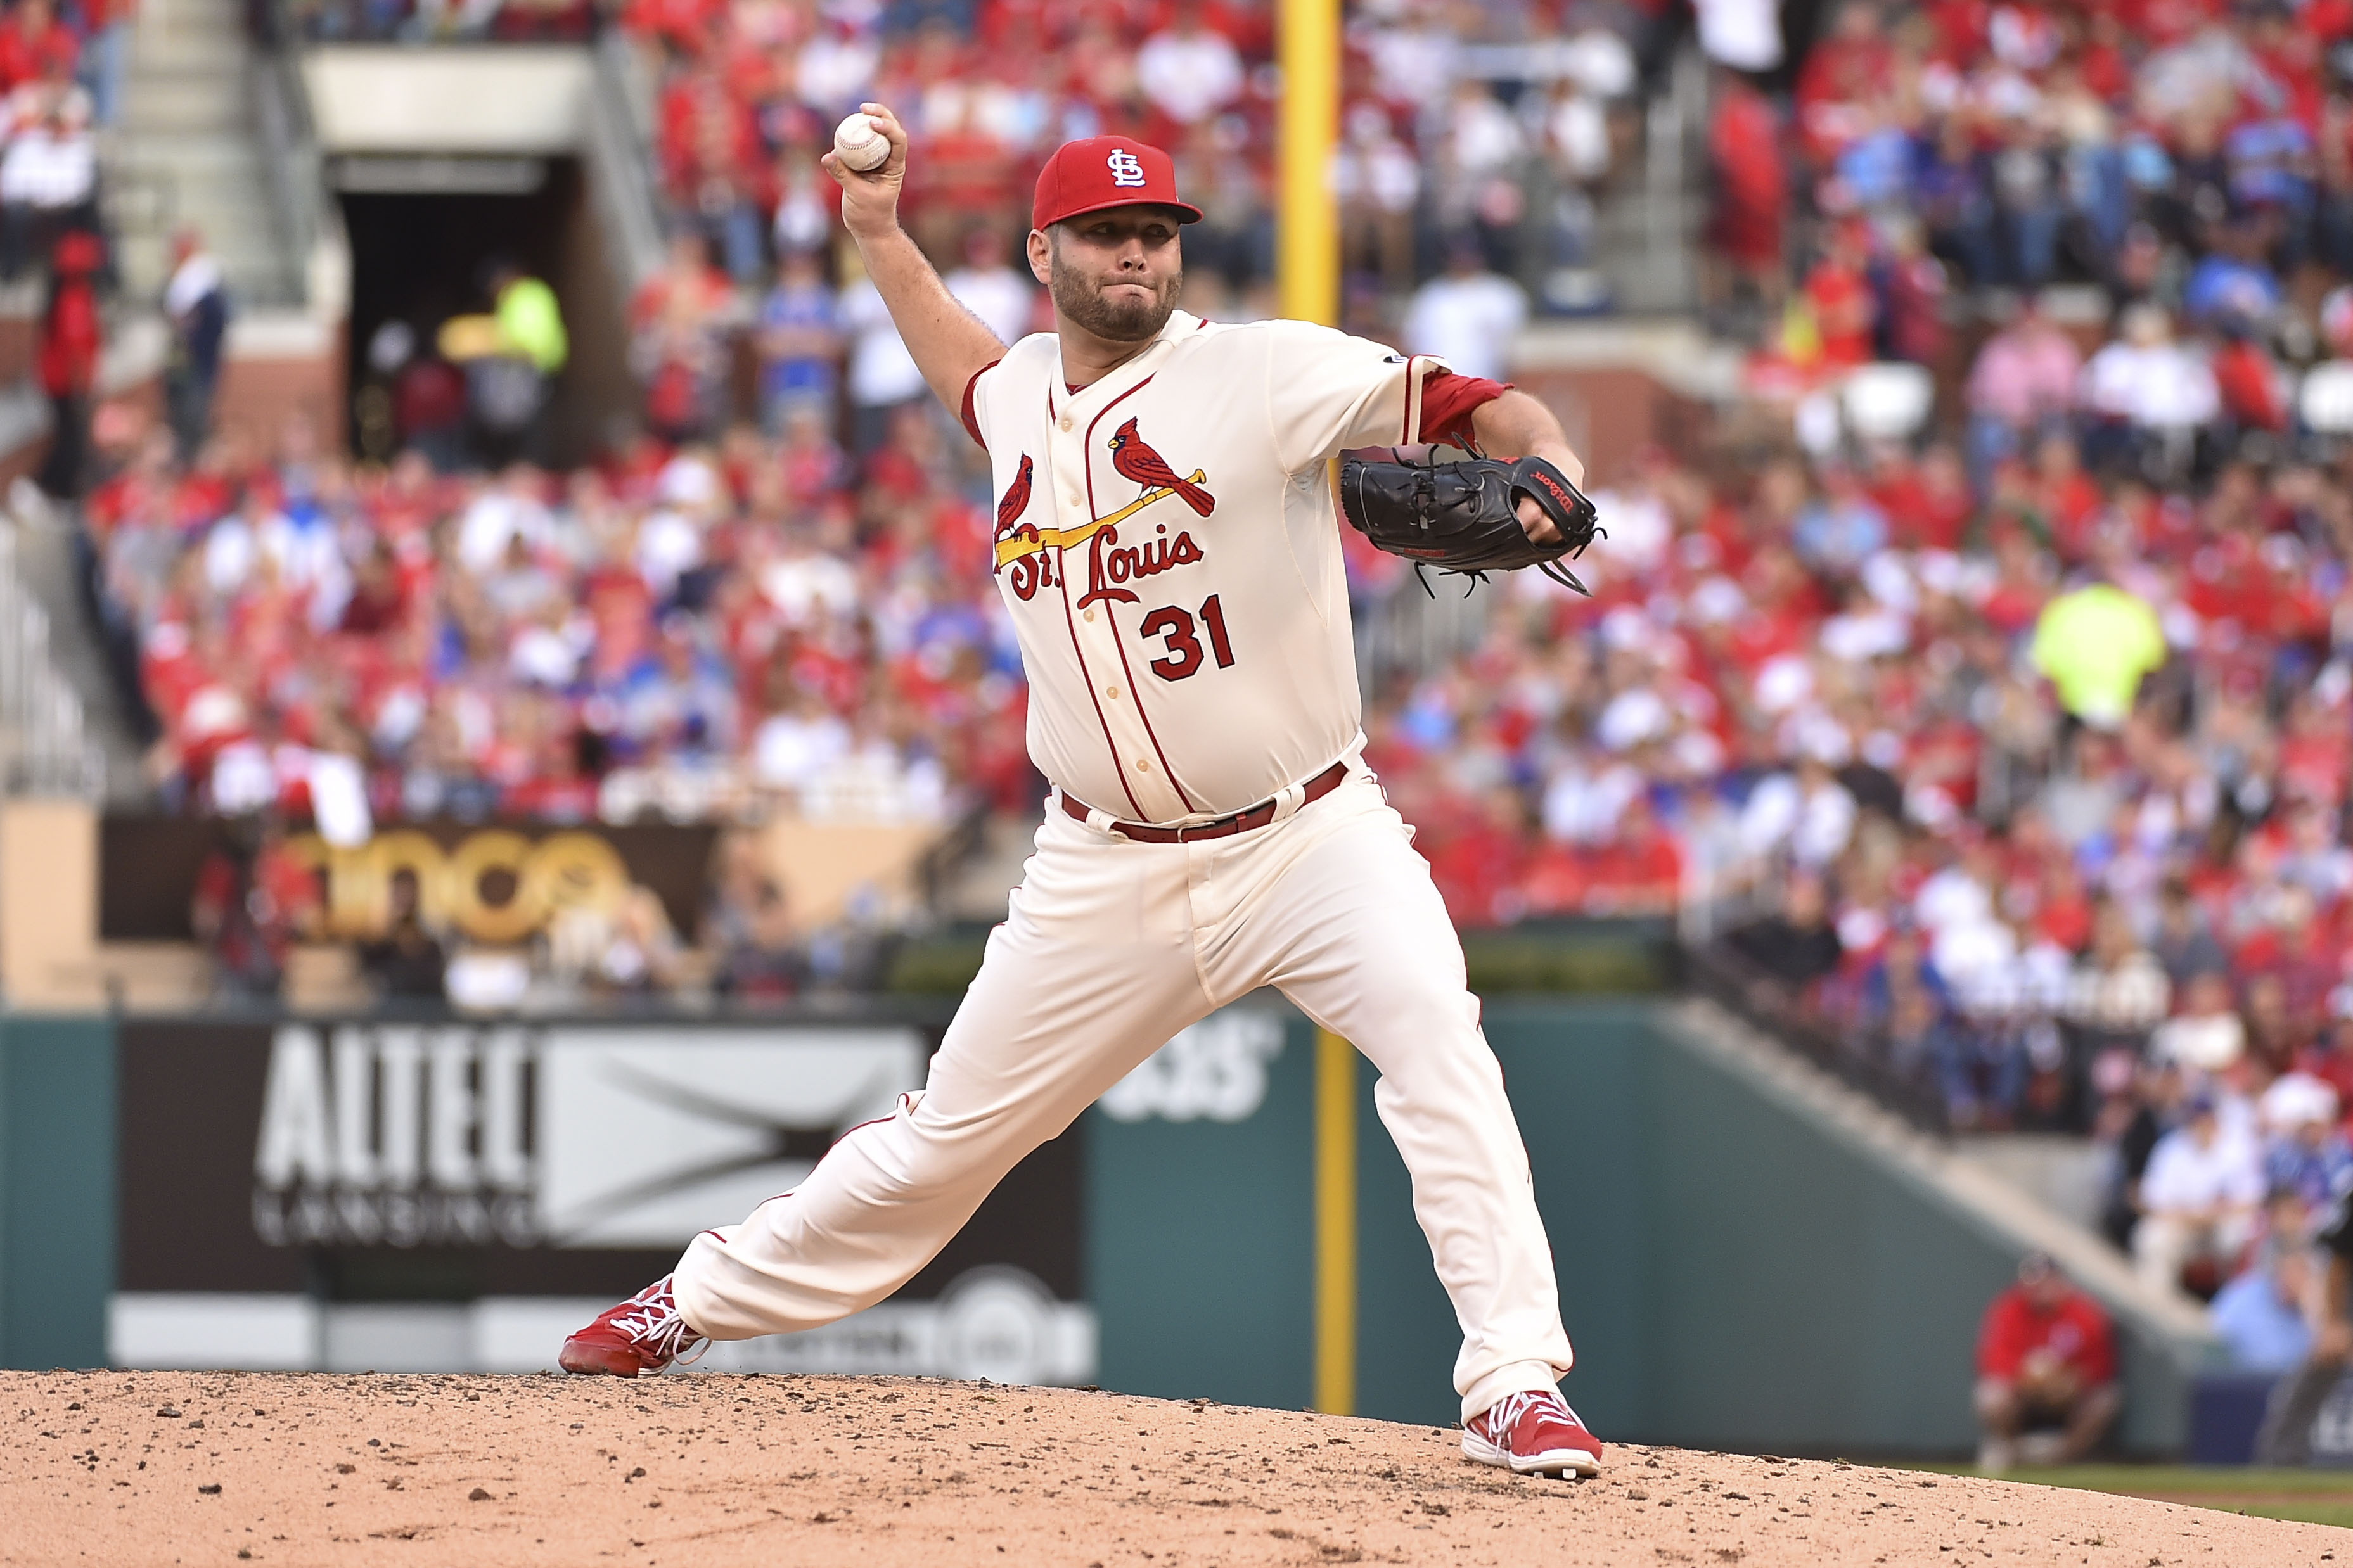 St Louis Cardinals news, rumors and free agency updates from Redbird Rants